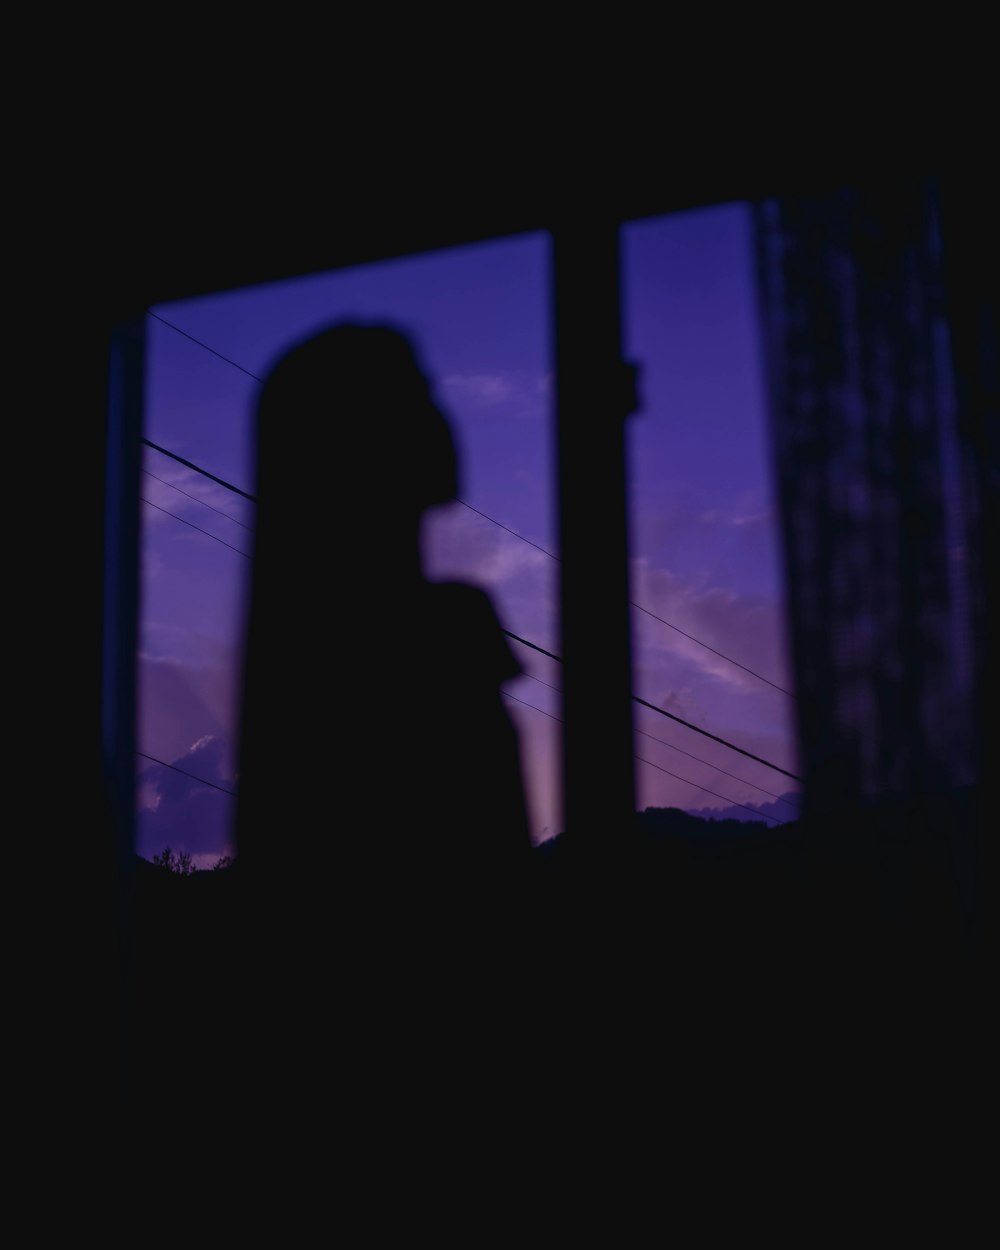 silhouette of woman standing in front of window